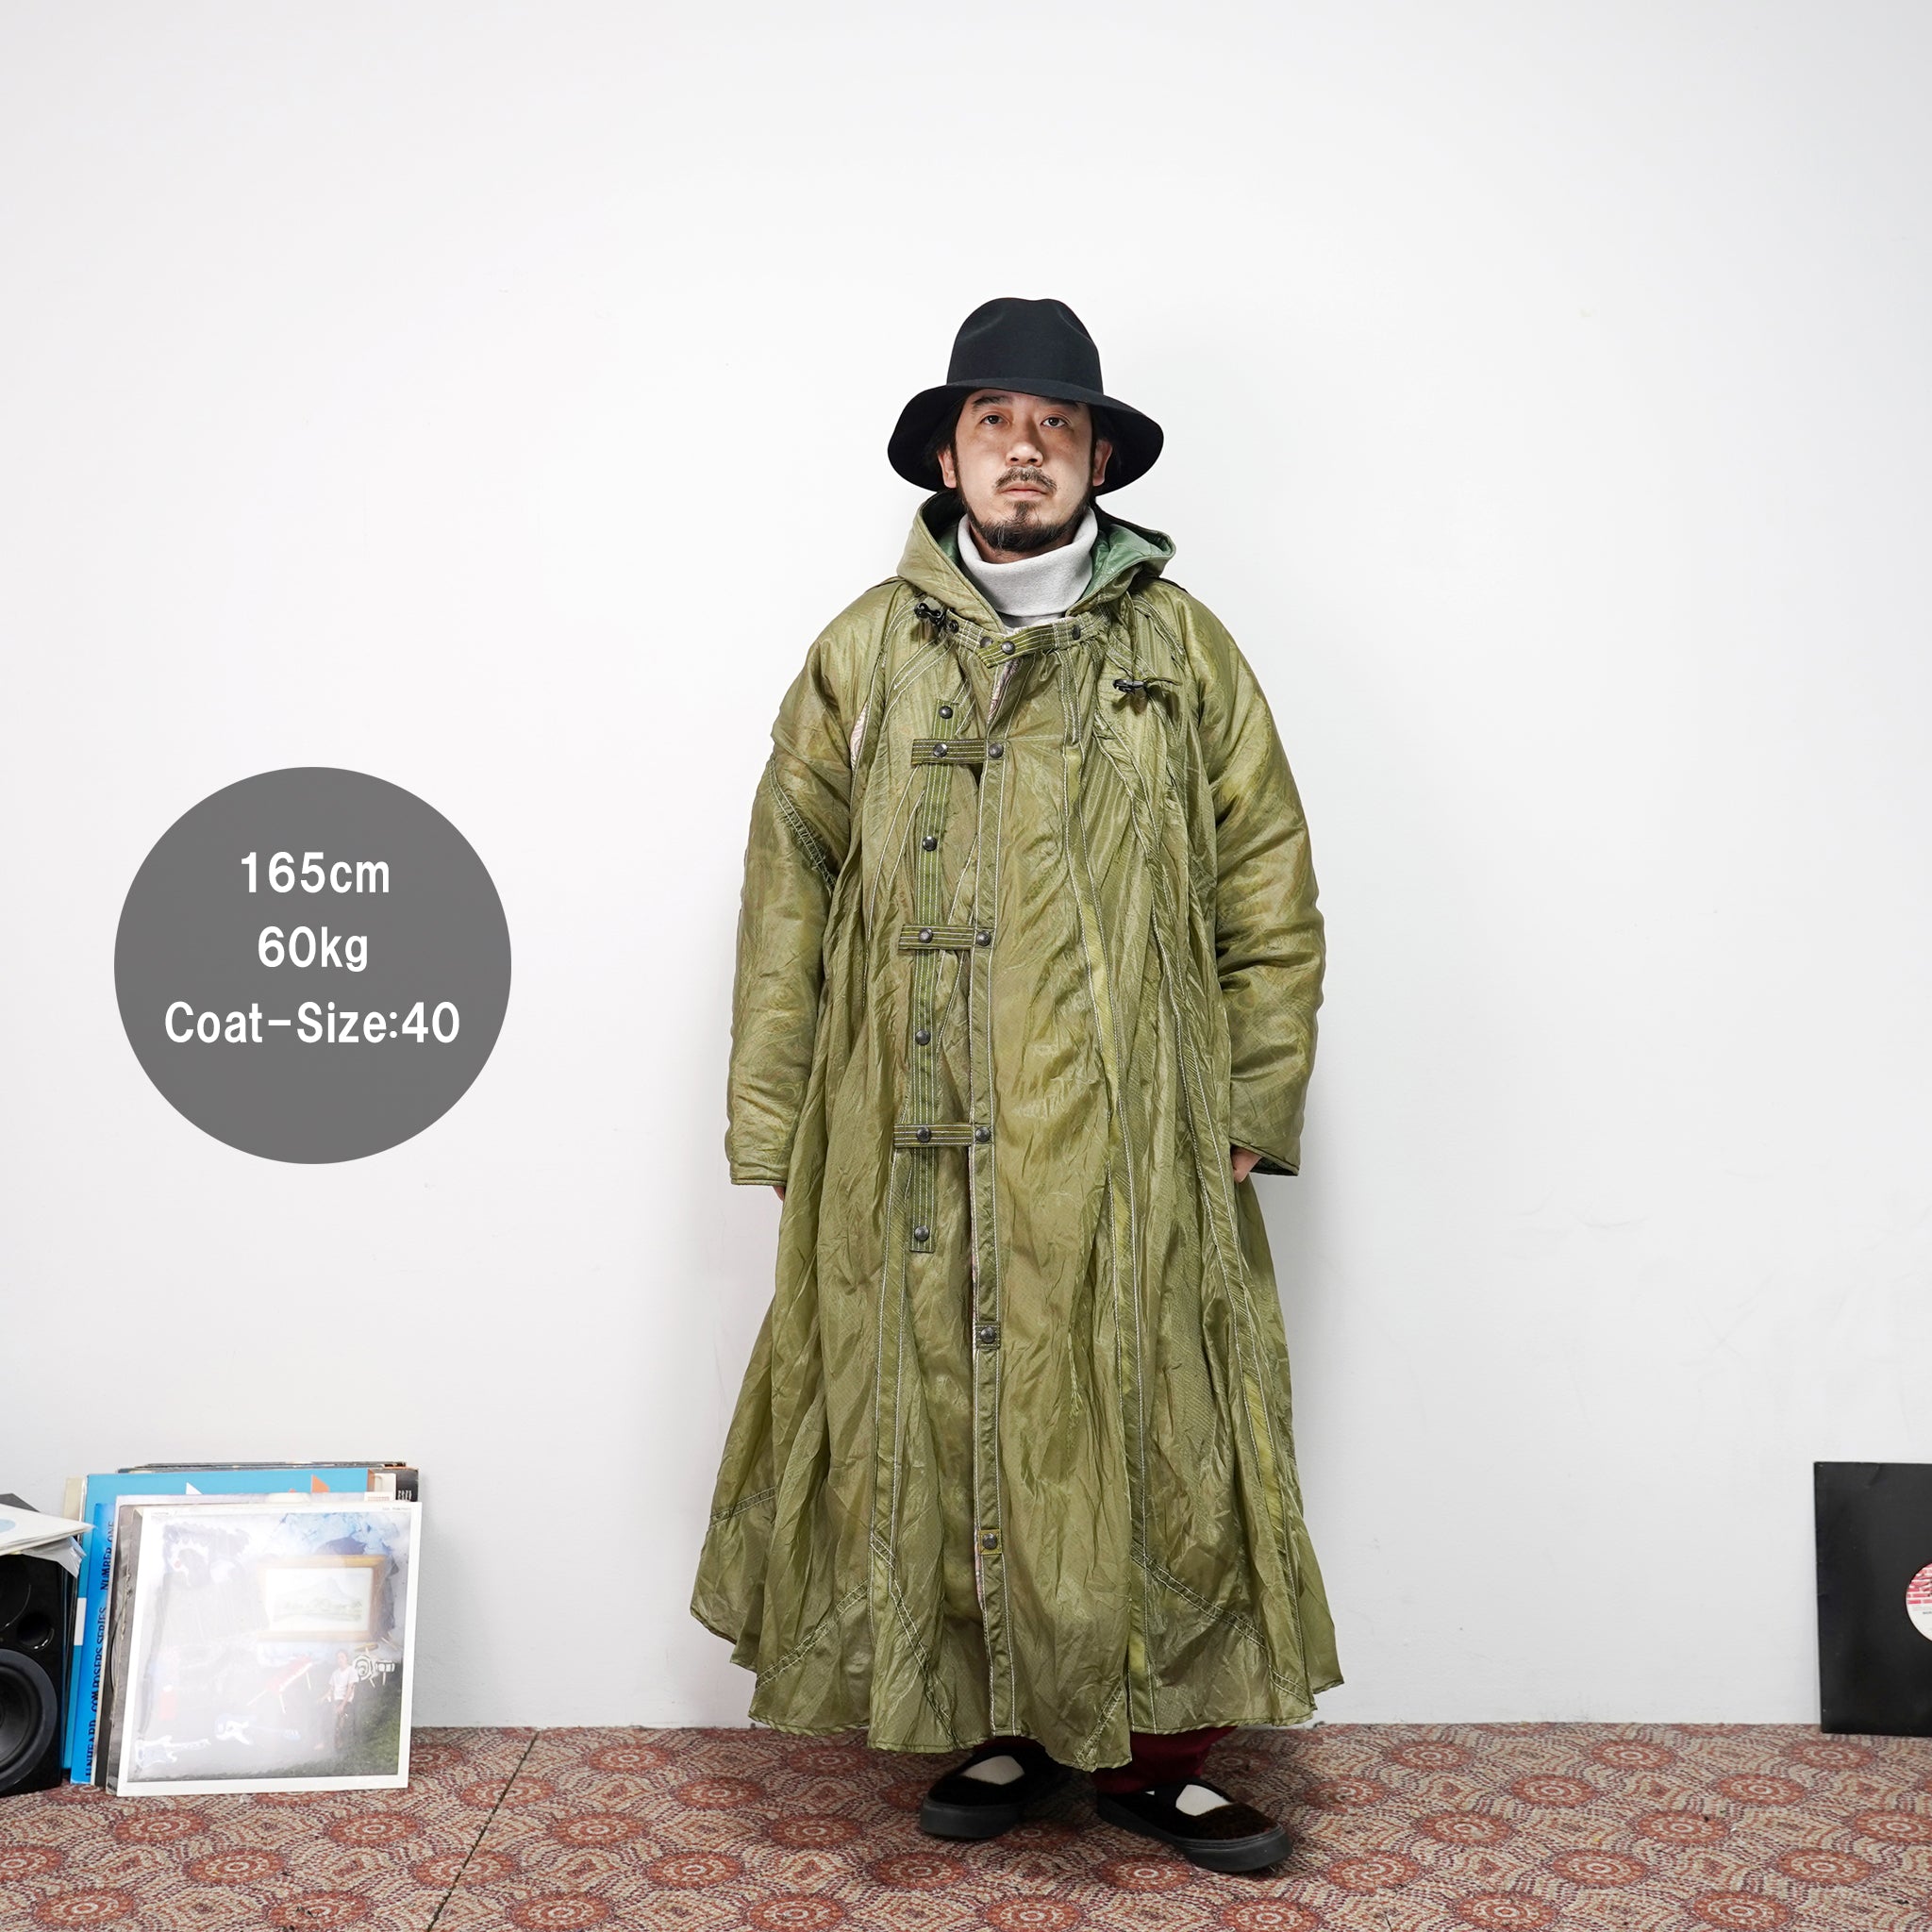 No:M30018 | Name:Insulated Duffle Coat | Color:Vintage Us Army Parachu